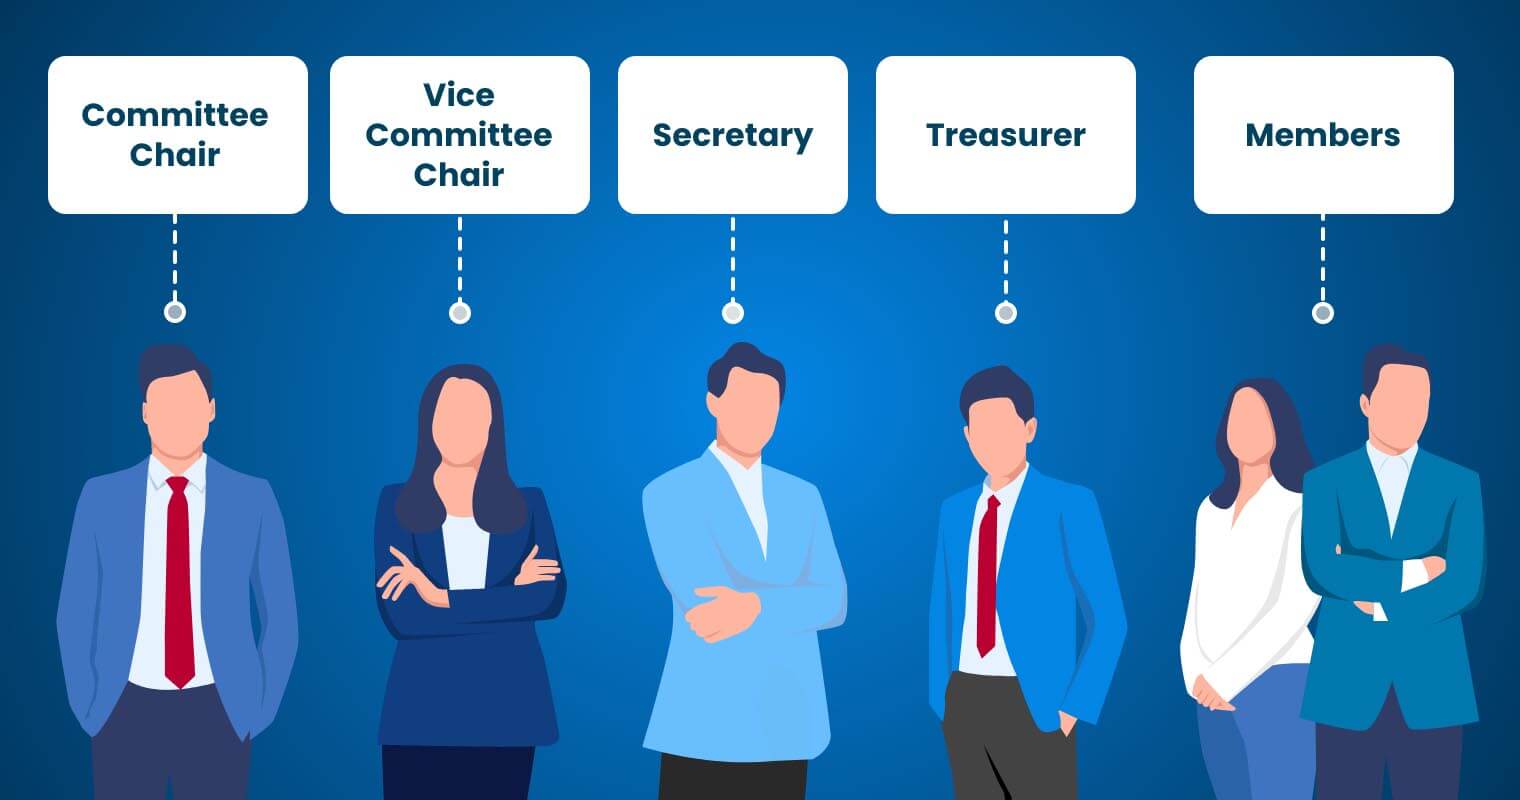 Who makes up a committee?